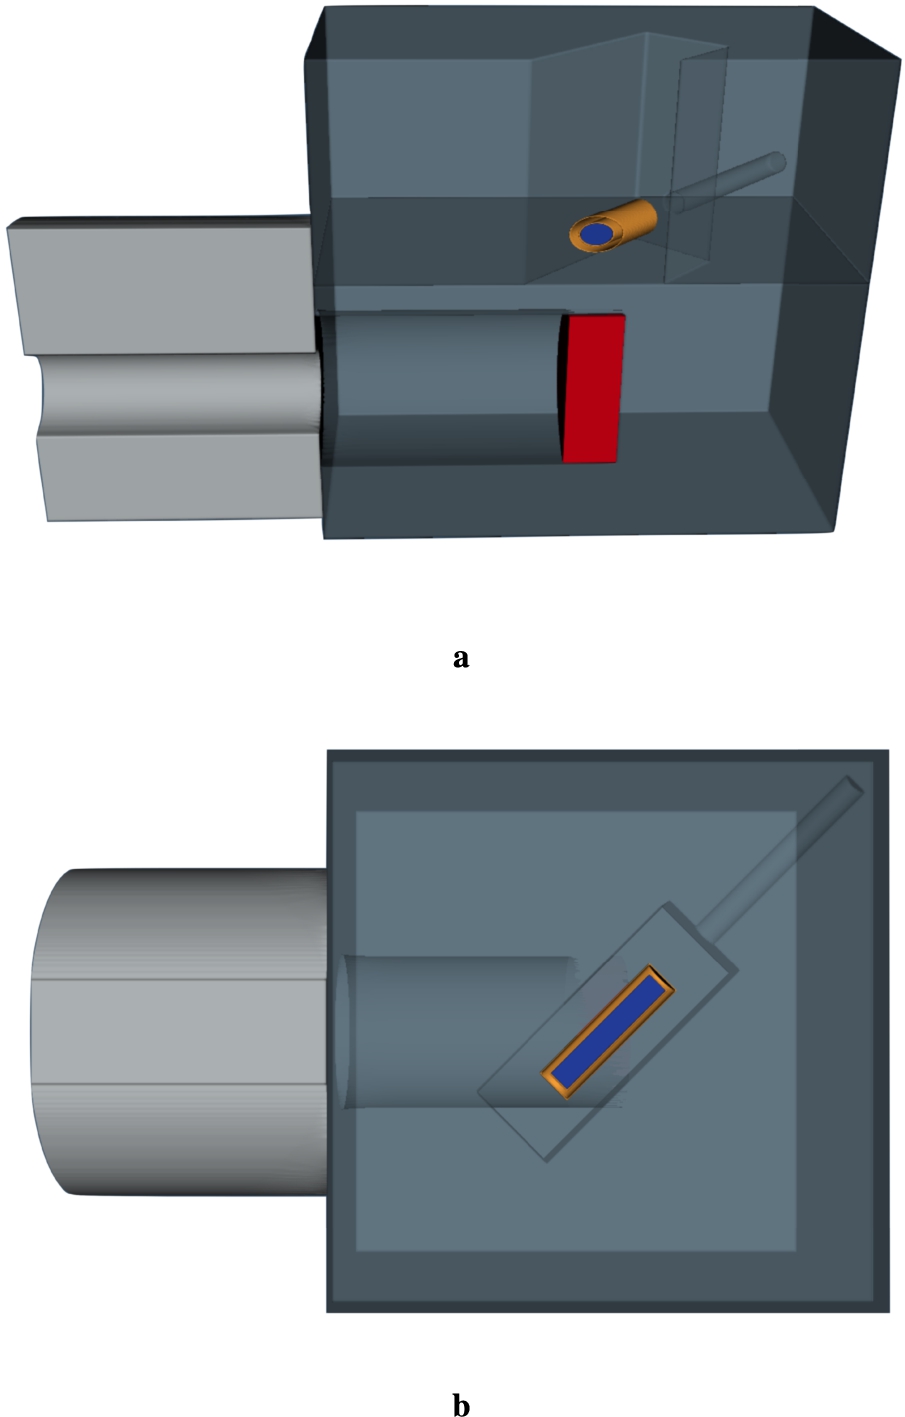 MCNP model of the lead reflector-moderator block at CMTF produced according to the engineering drawings in Fig. 203. (A) vertical section (b) horizontal section at the height of the moderator vessel.